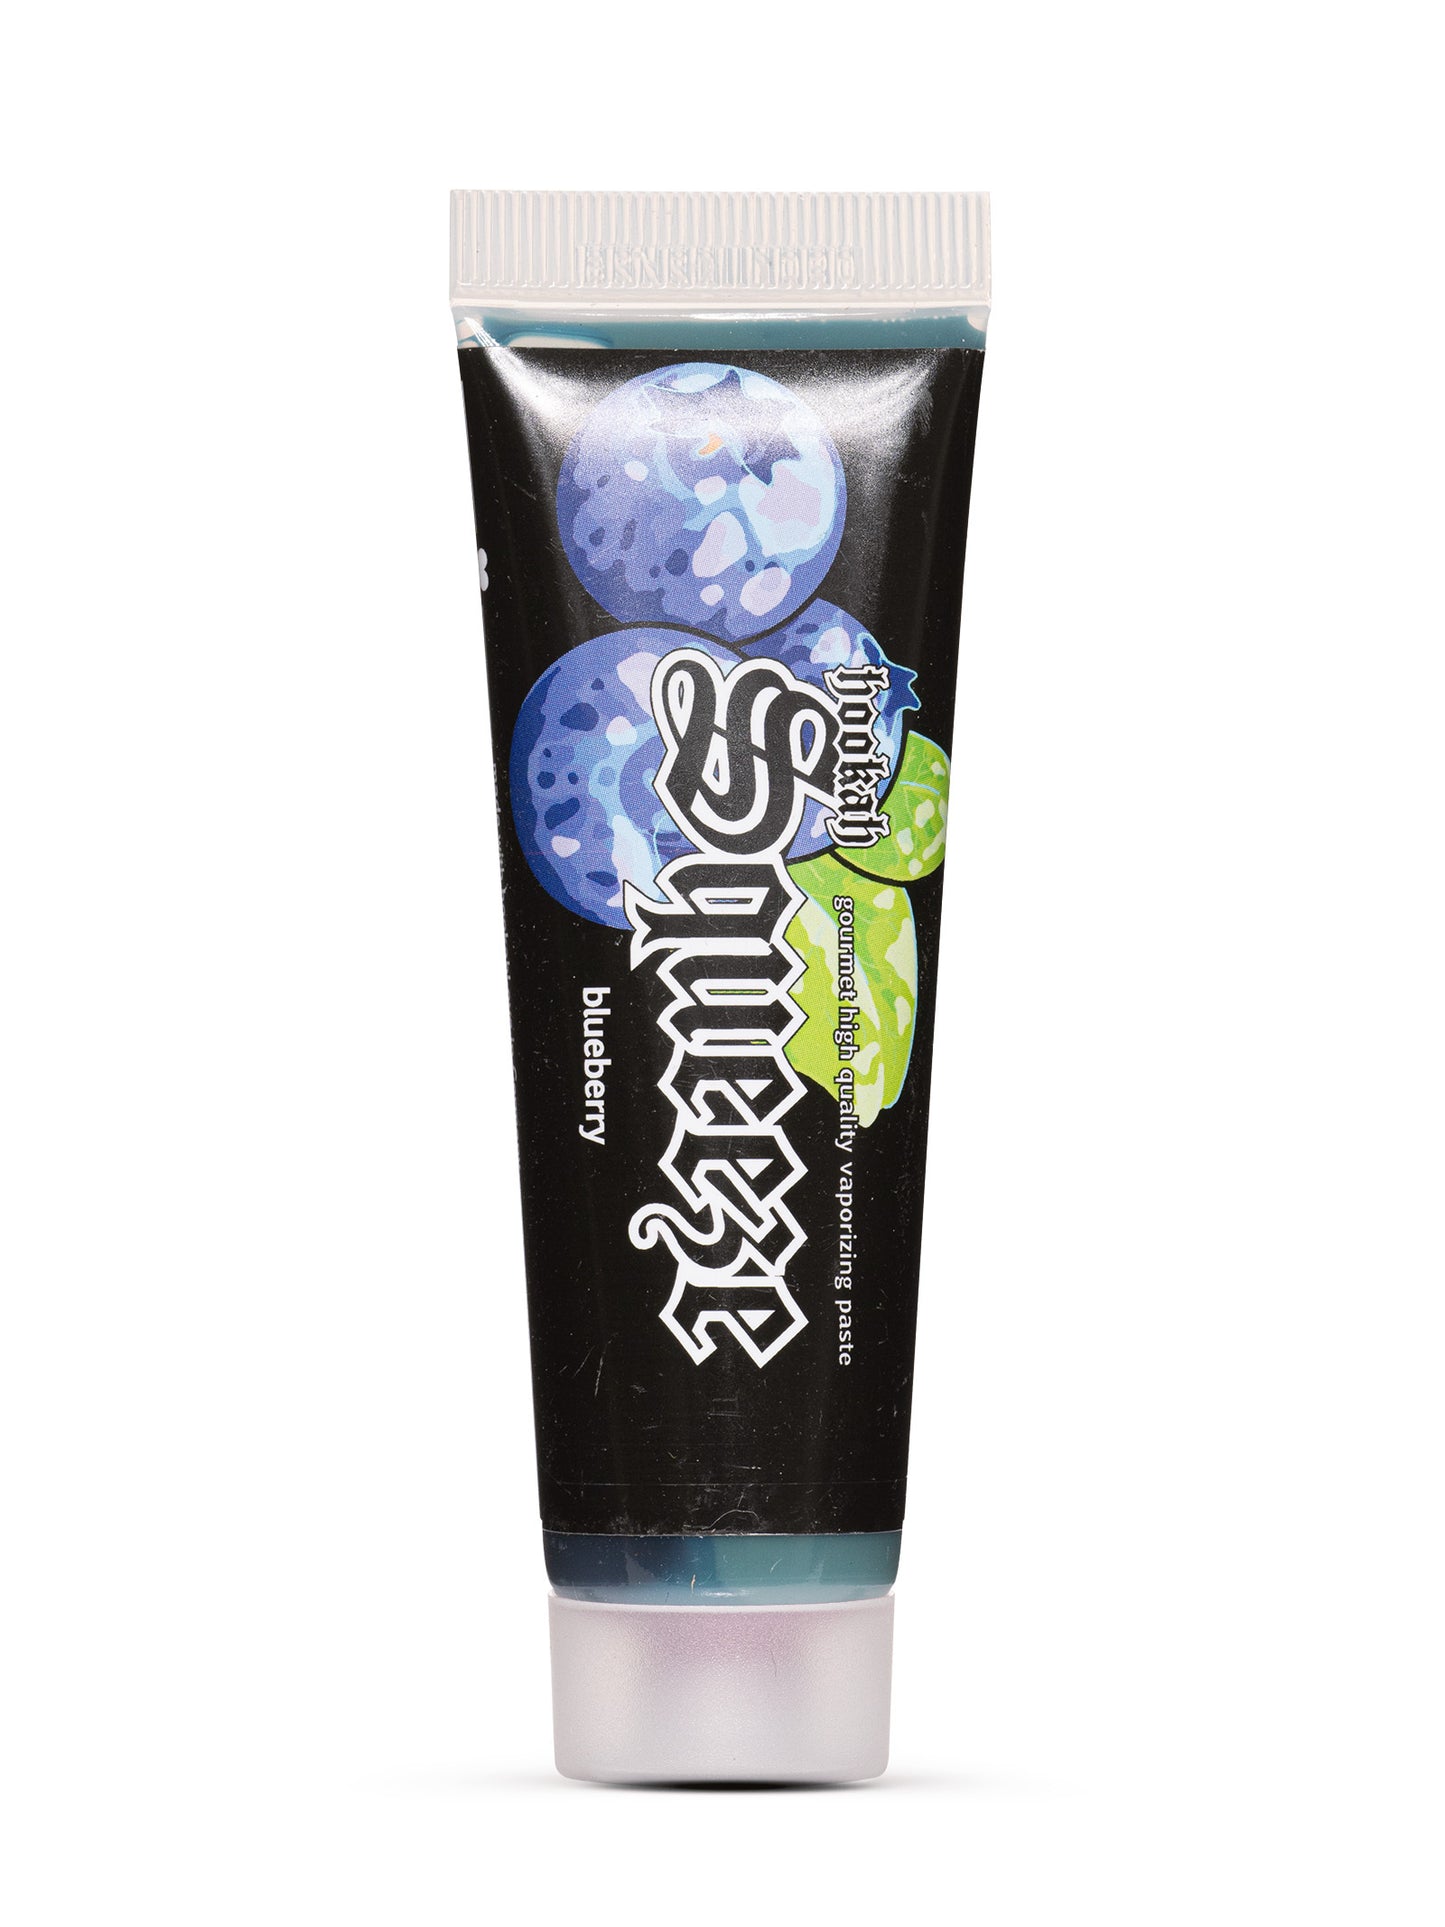 Hookah Squeeze 25g Nicotine Free - Blueberry